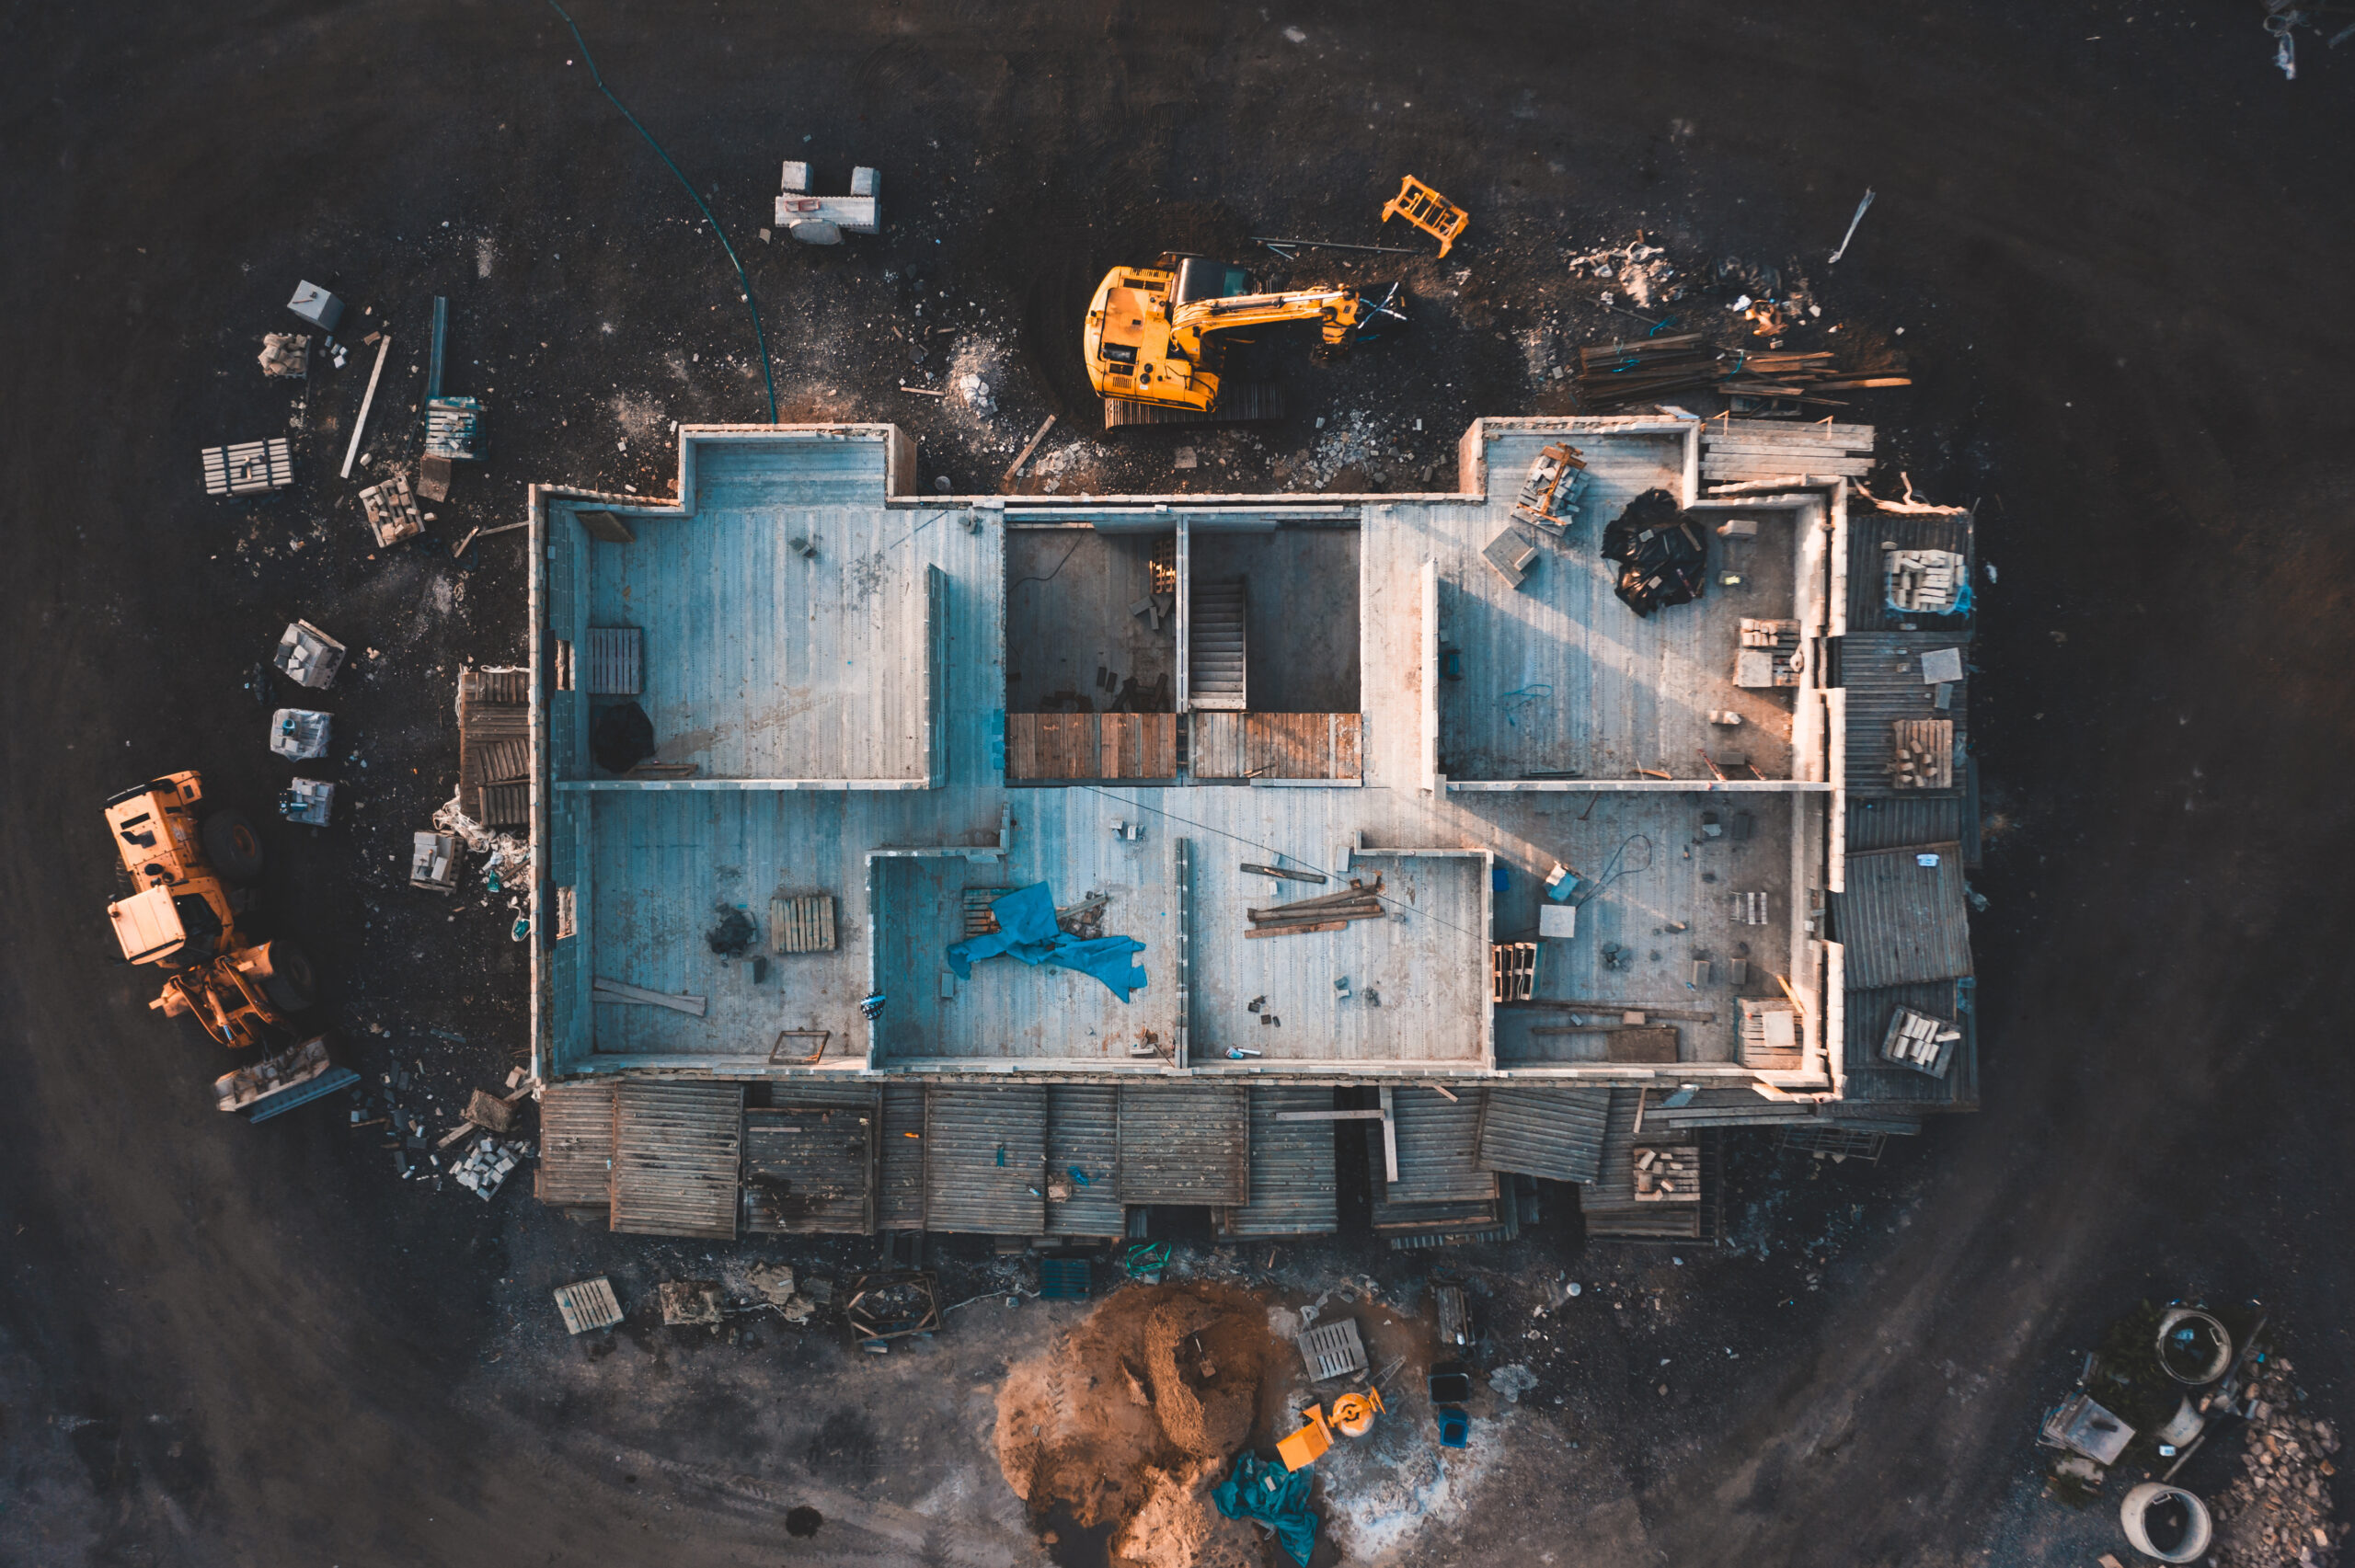 Aerial birds eye image of the frame of a house being built on a construction site at sunset - Wooden floor and walls are visible. Several attractive nuisances are visible